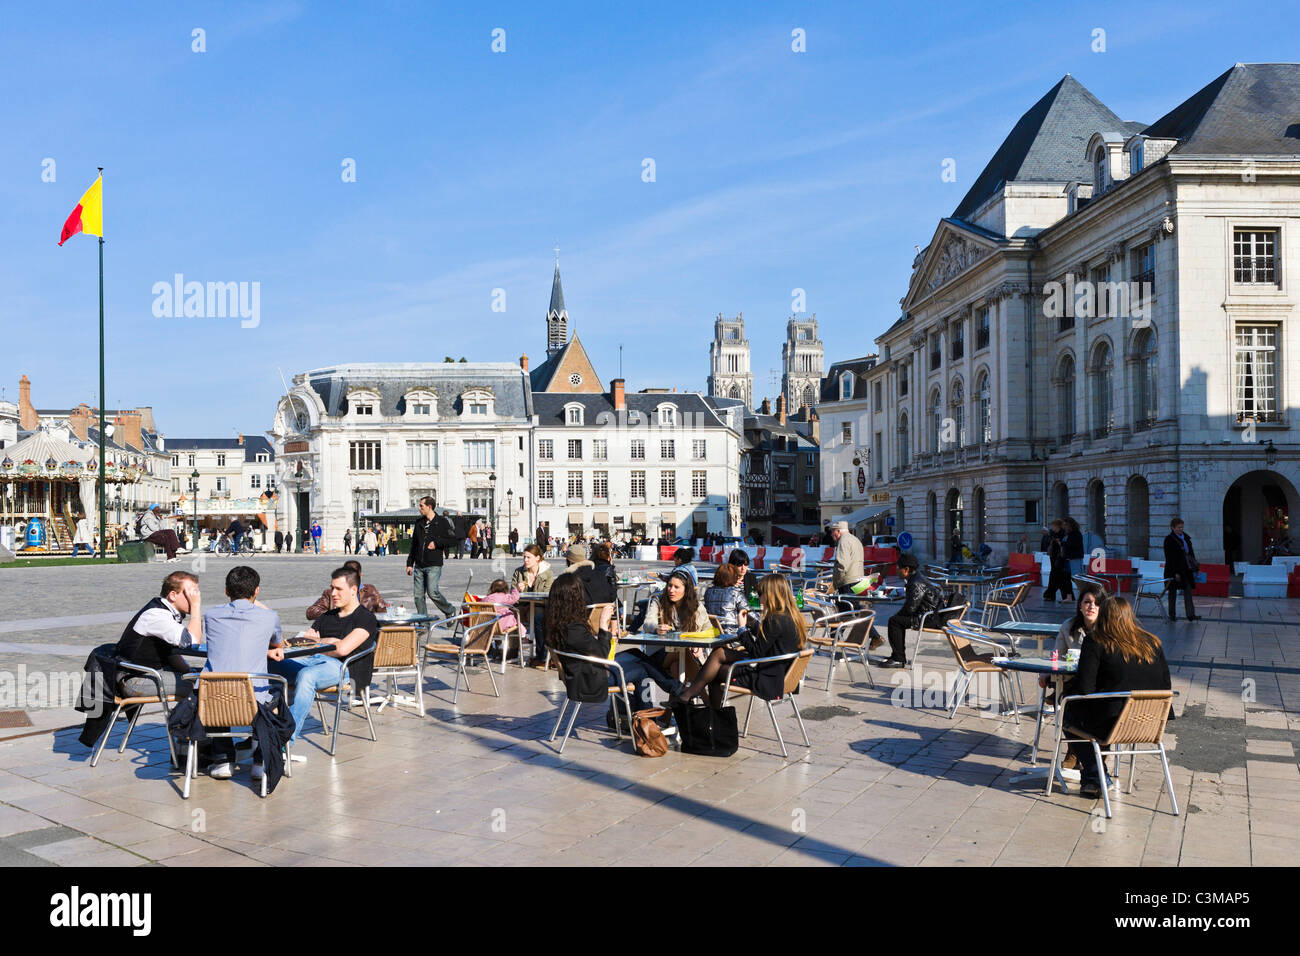 Pavement cafe in front of the statue of Joan of Arc with the cathedral towers in the distance, Place du Martroi, Orleans, France Stock Photo